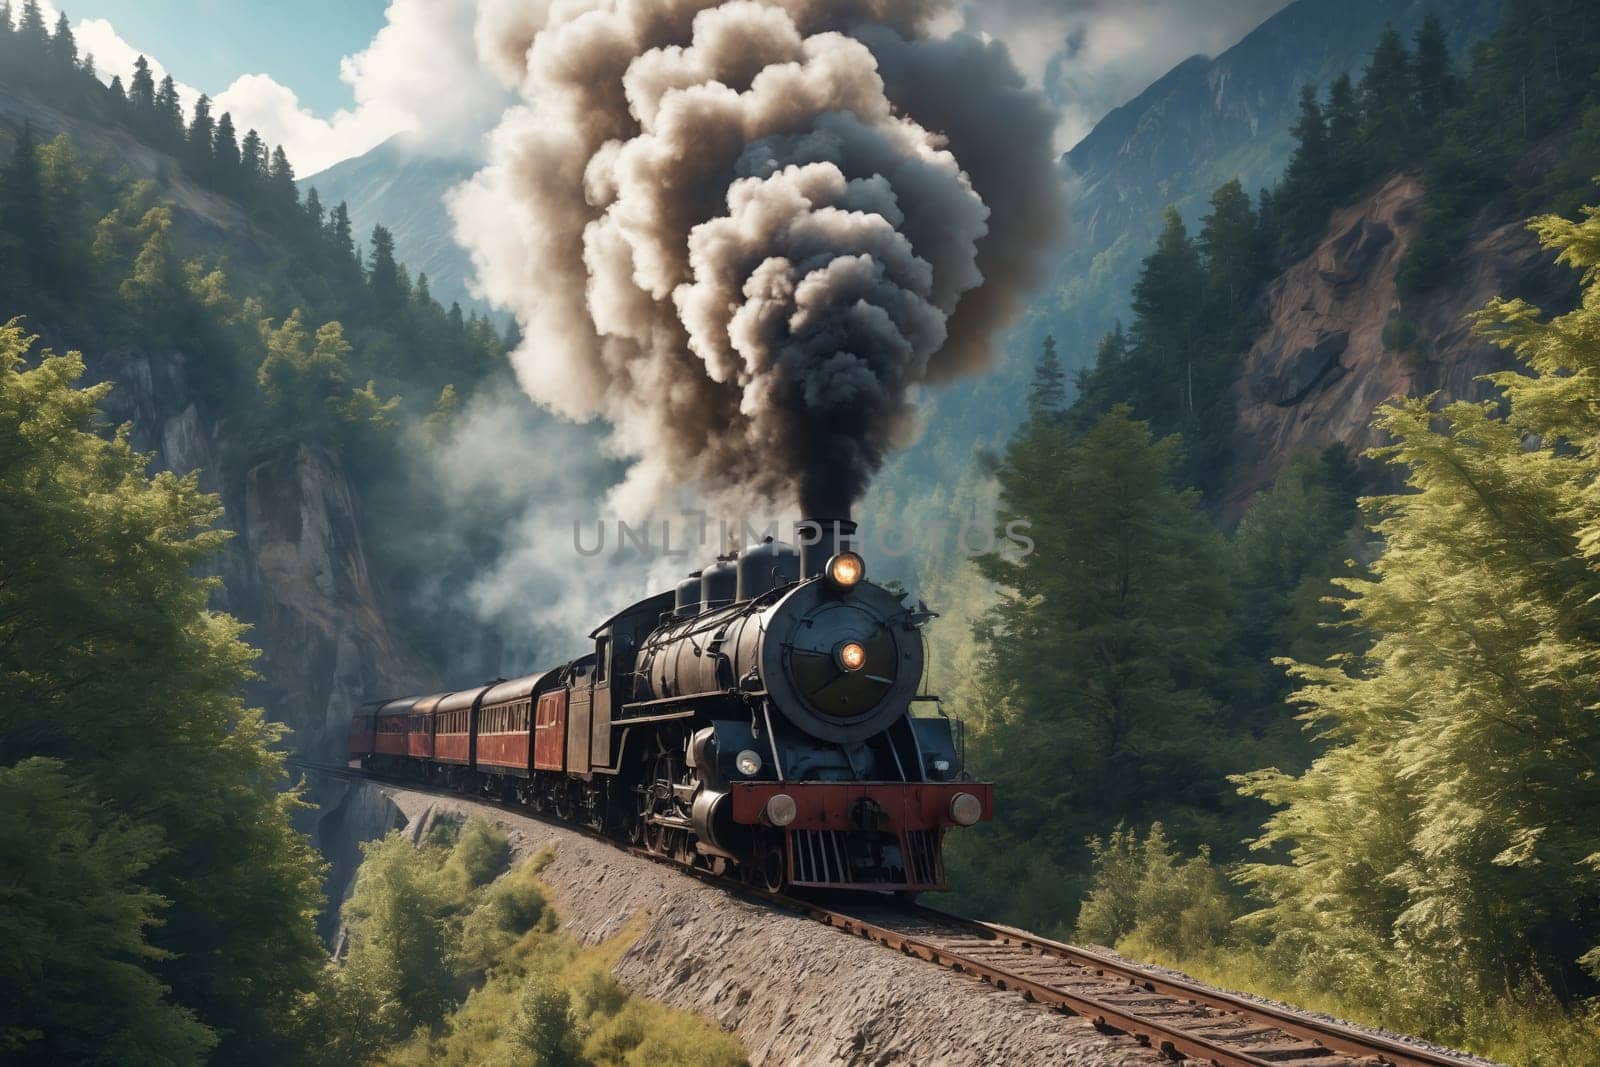 Journey through nature, a classic train steams past verdant flora with an elegant steam plume.